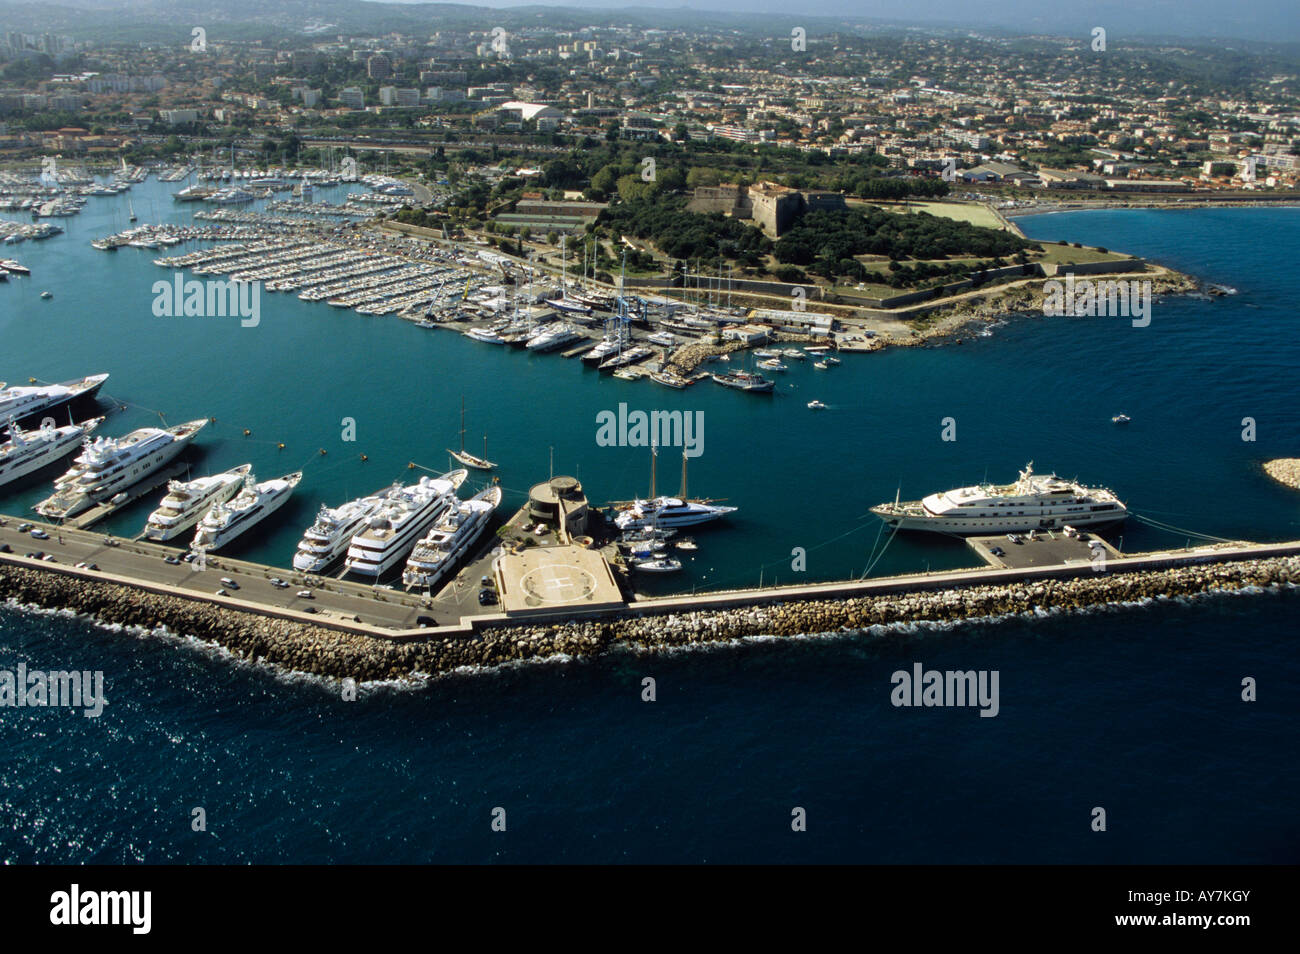 Aerial view of Antibes France Stock Photo